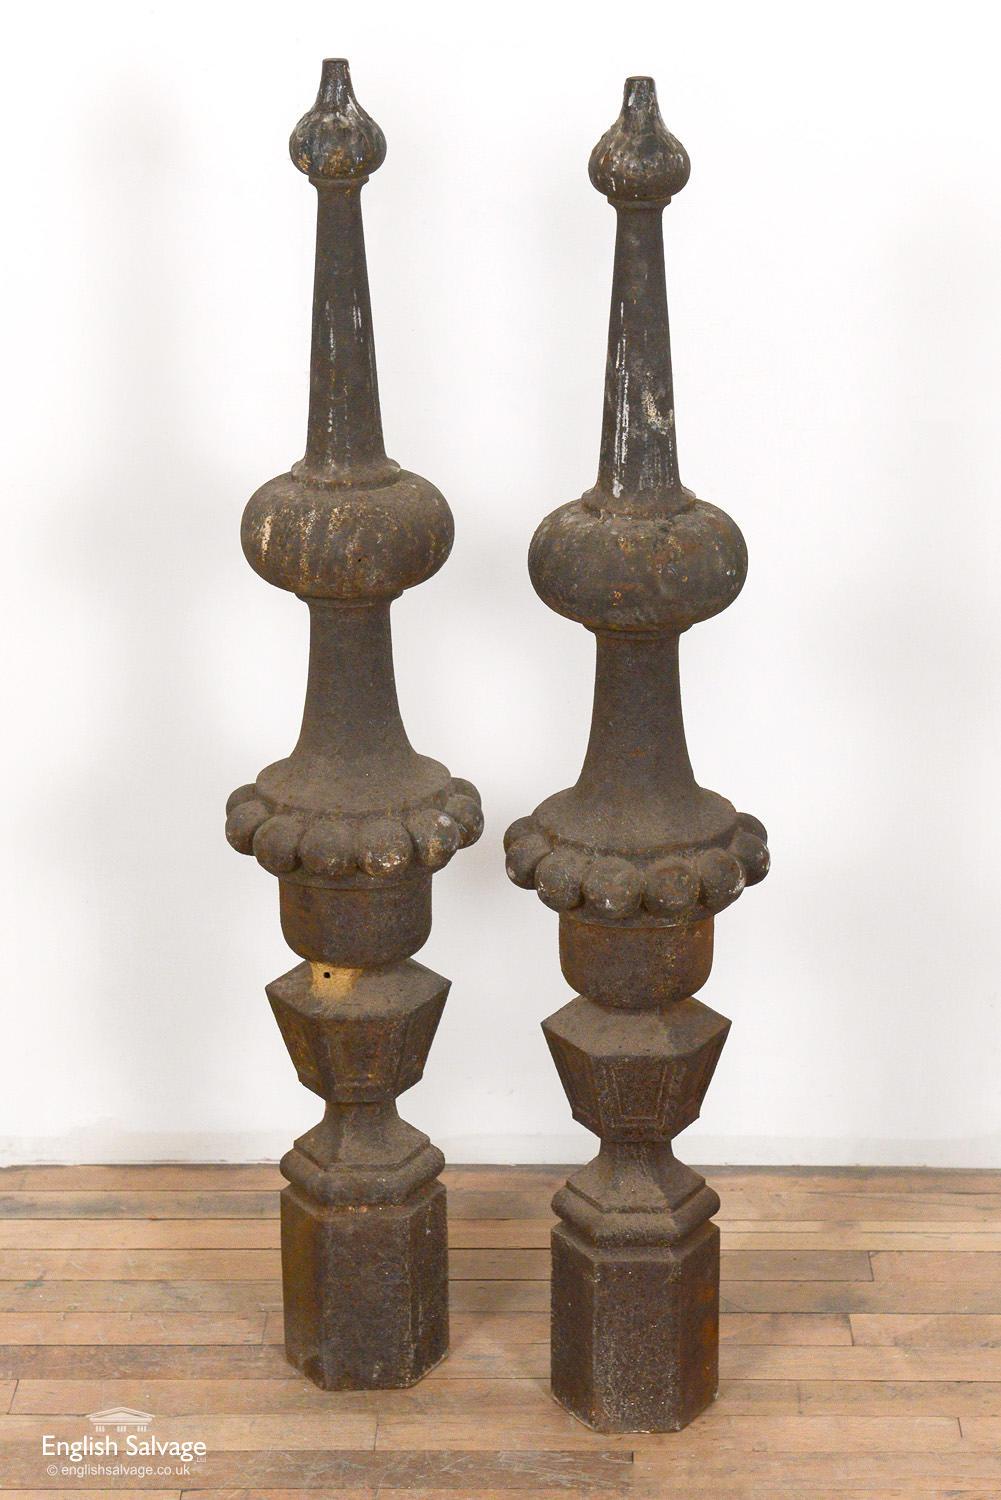 Reclaimed rusted cast iron finials with hexagonal bases. One post has two splits, as shown in the photos.